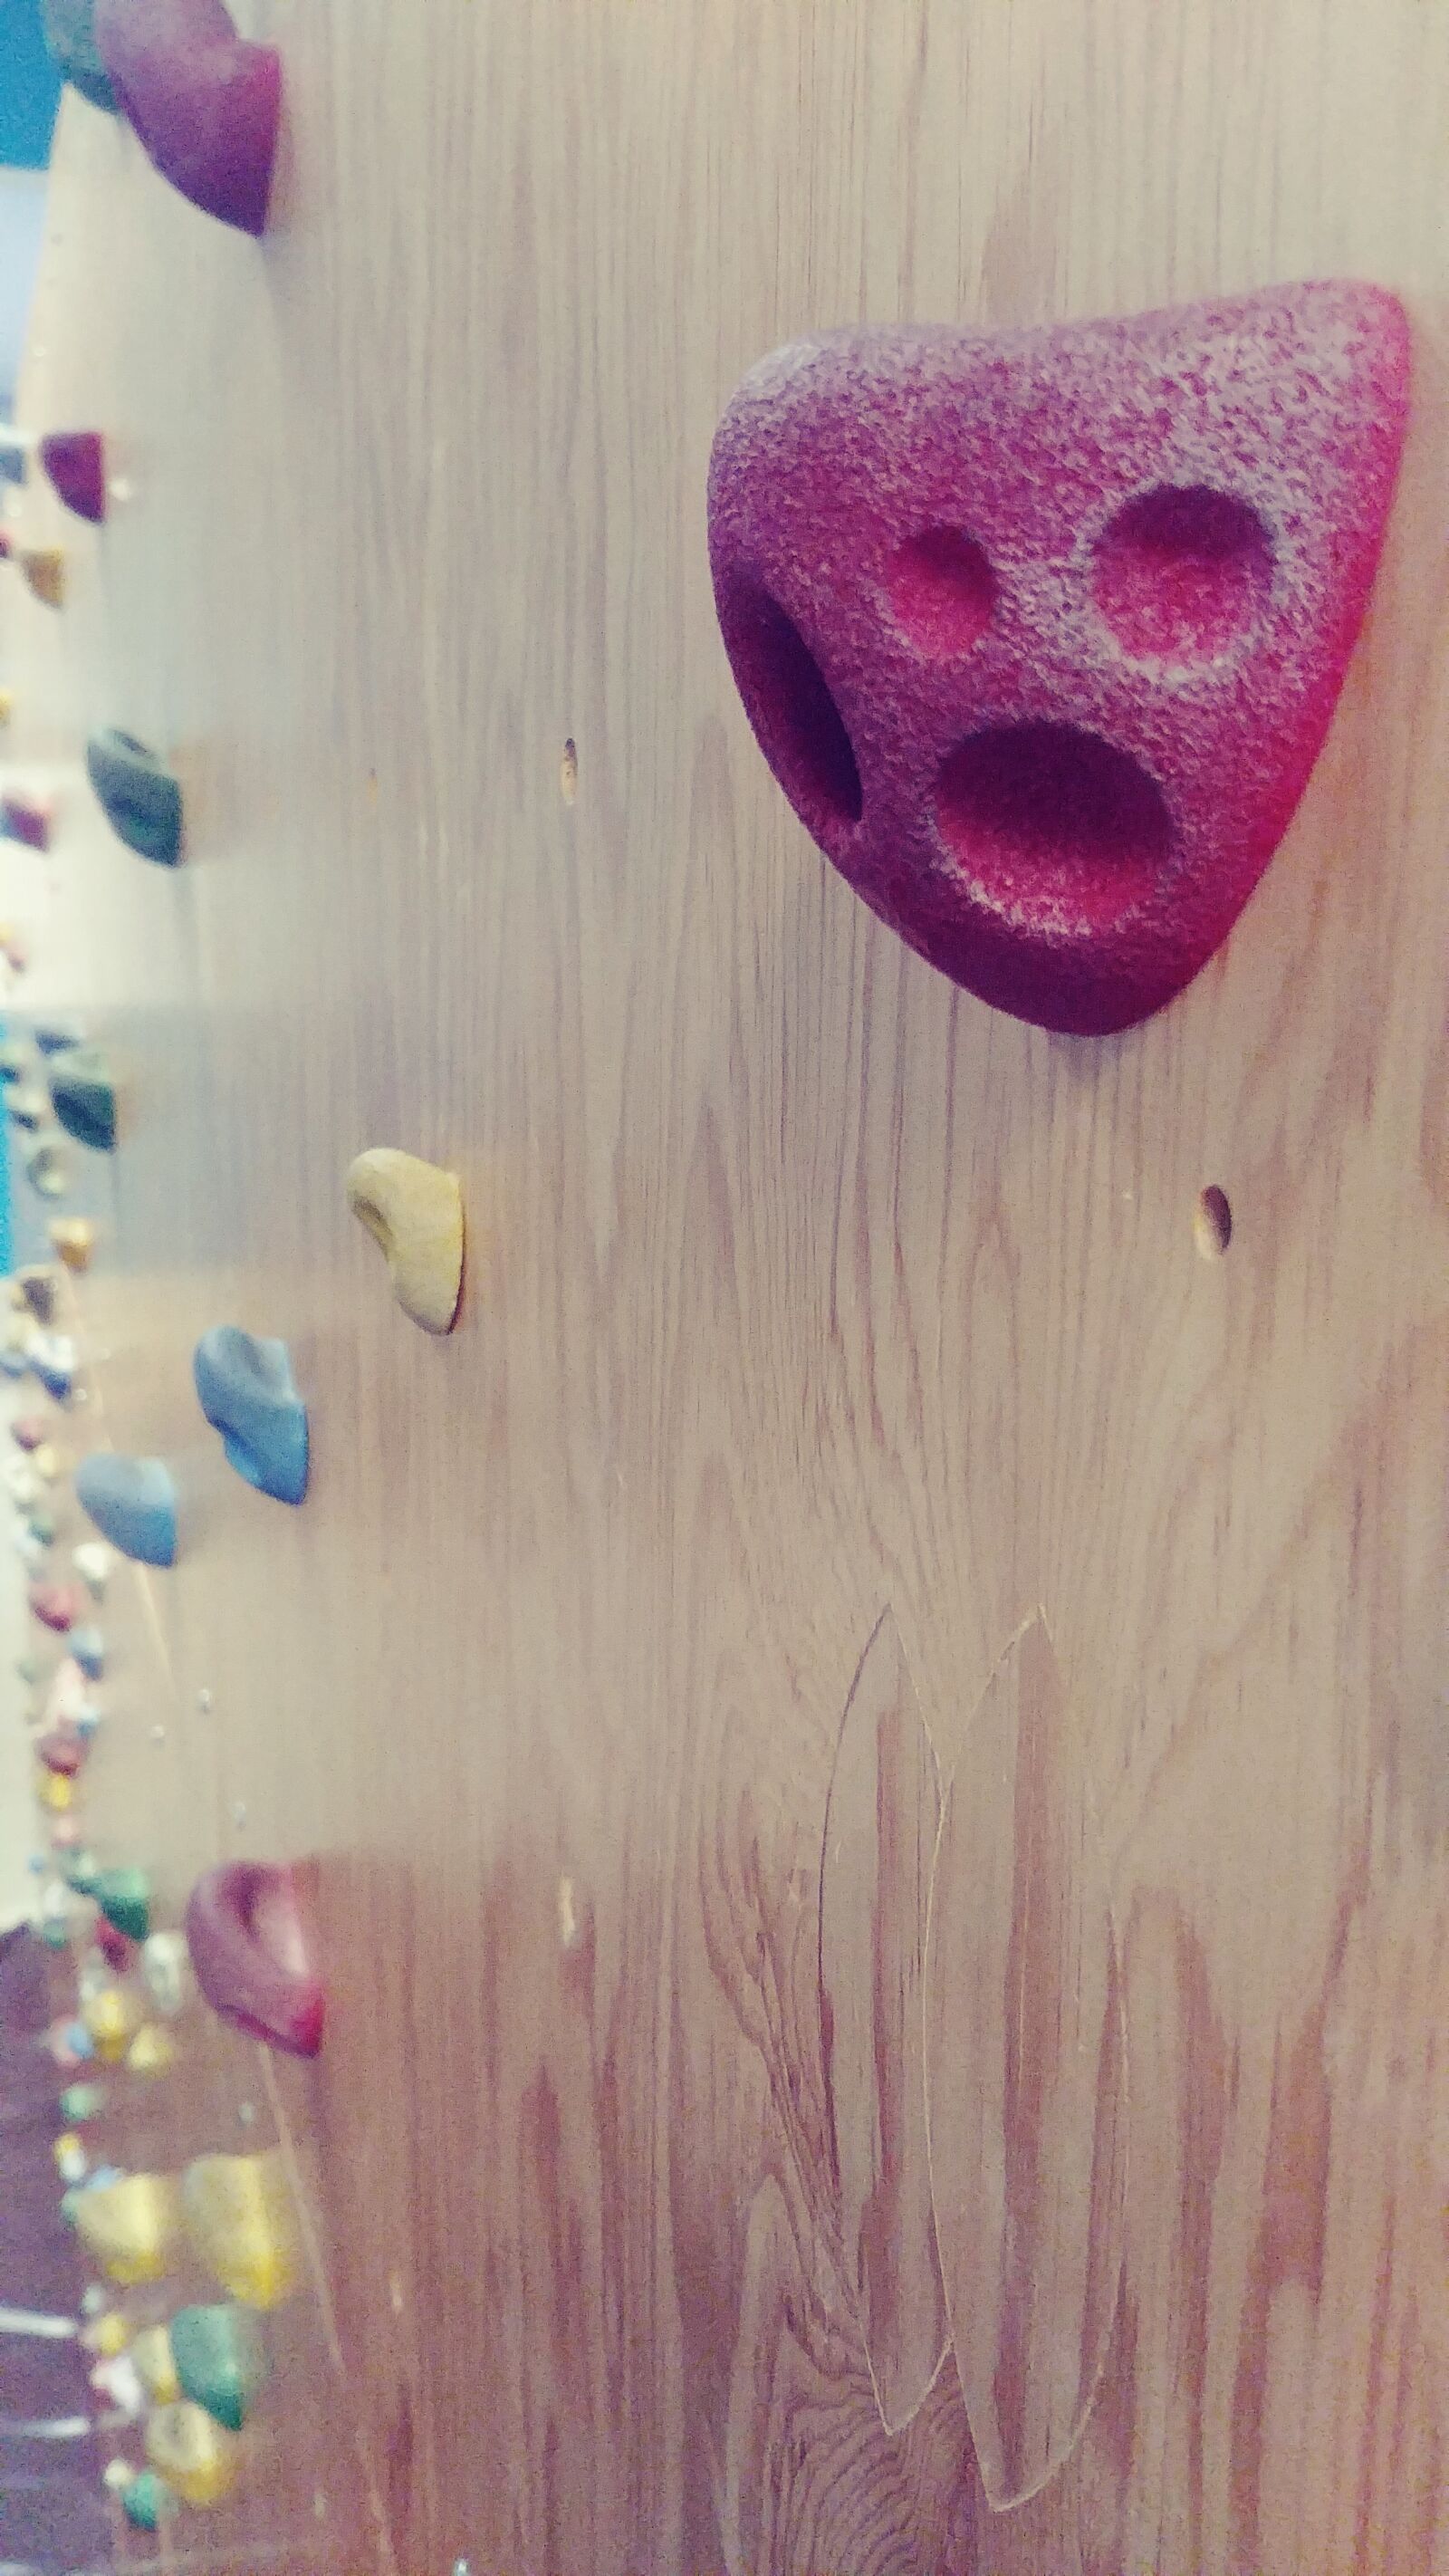 LG G6 sample photo. Bouldering, sports, indoor photography